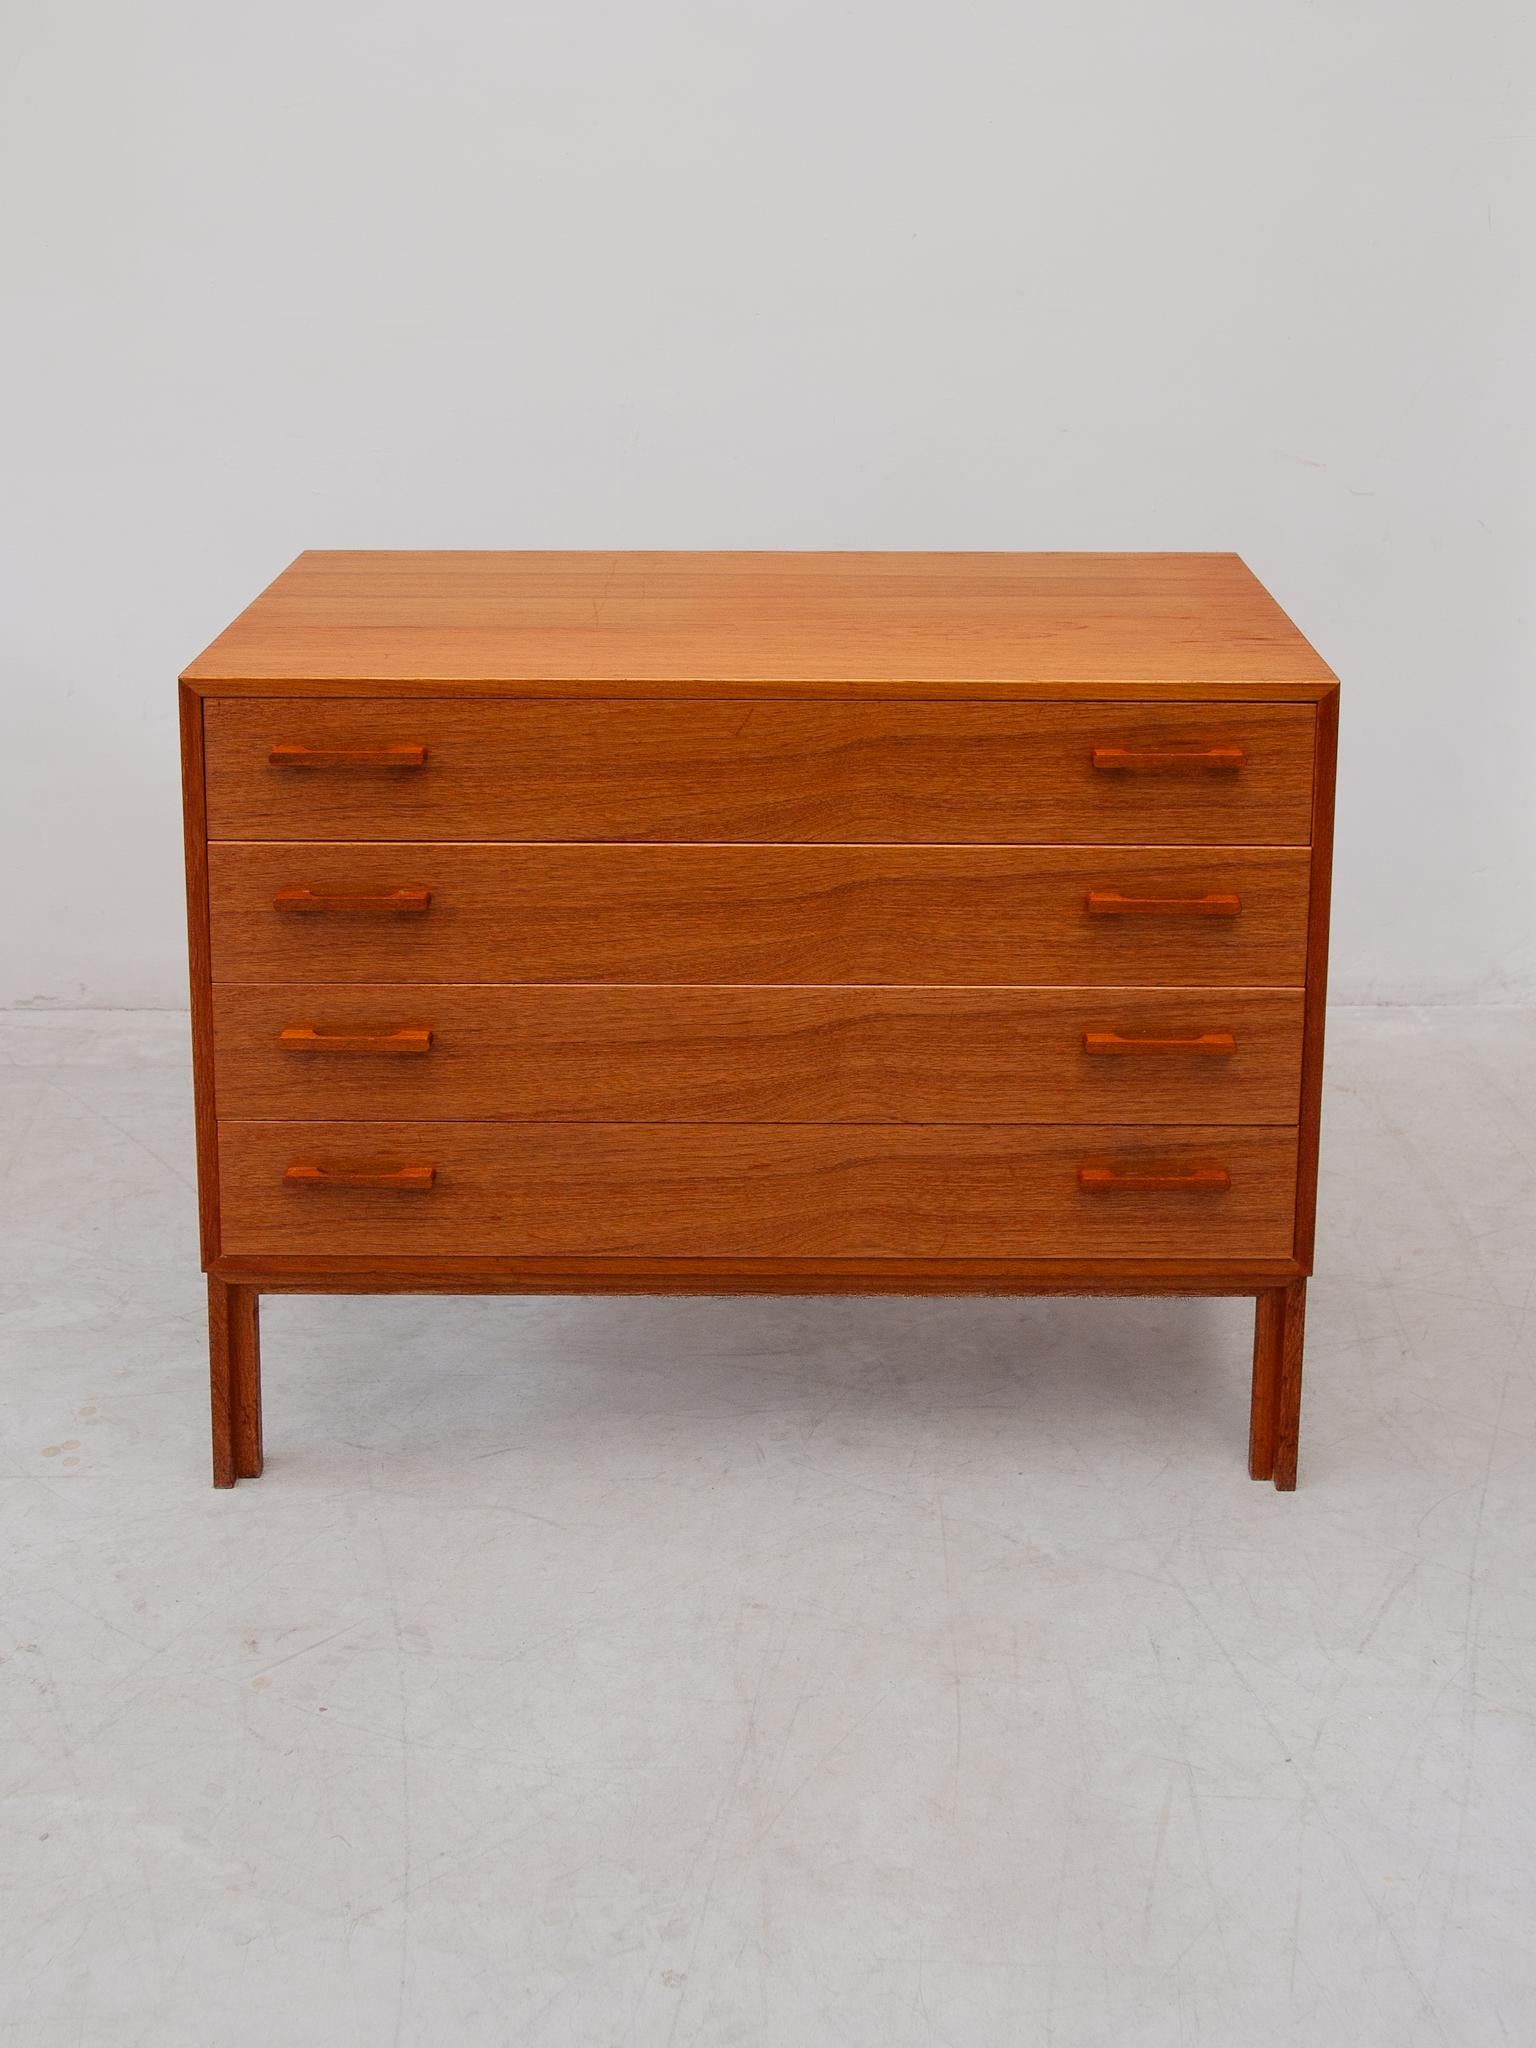 Modular Sideboard with Sliding Doors designed by Kai Kristiansen 1970s For Sale 5